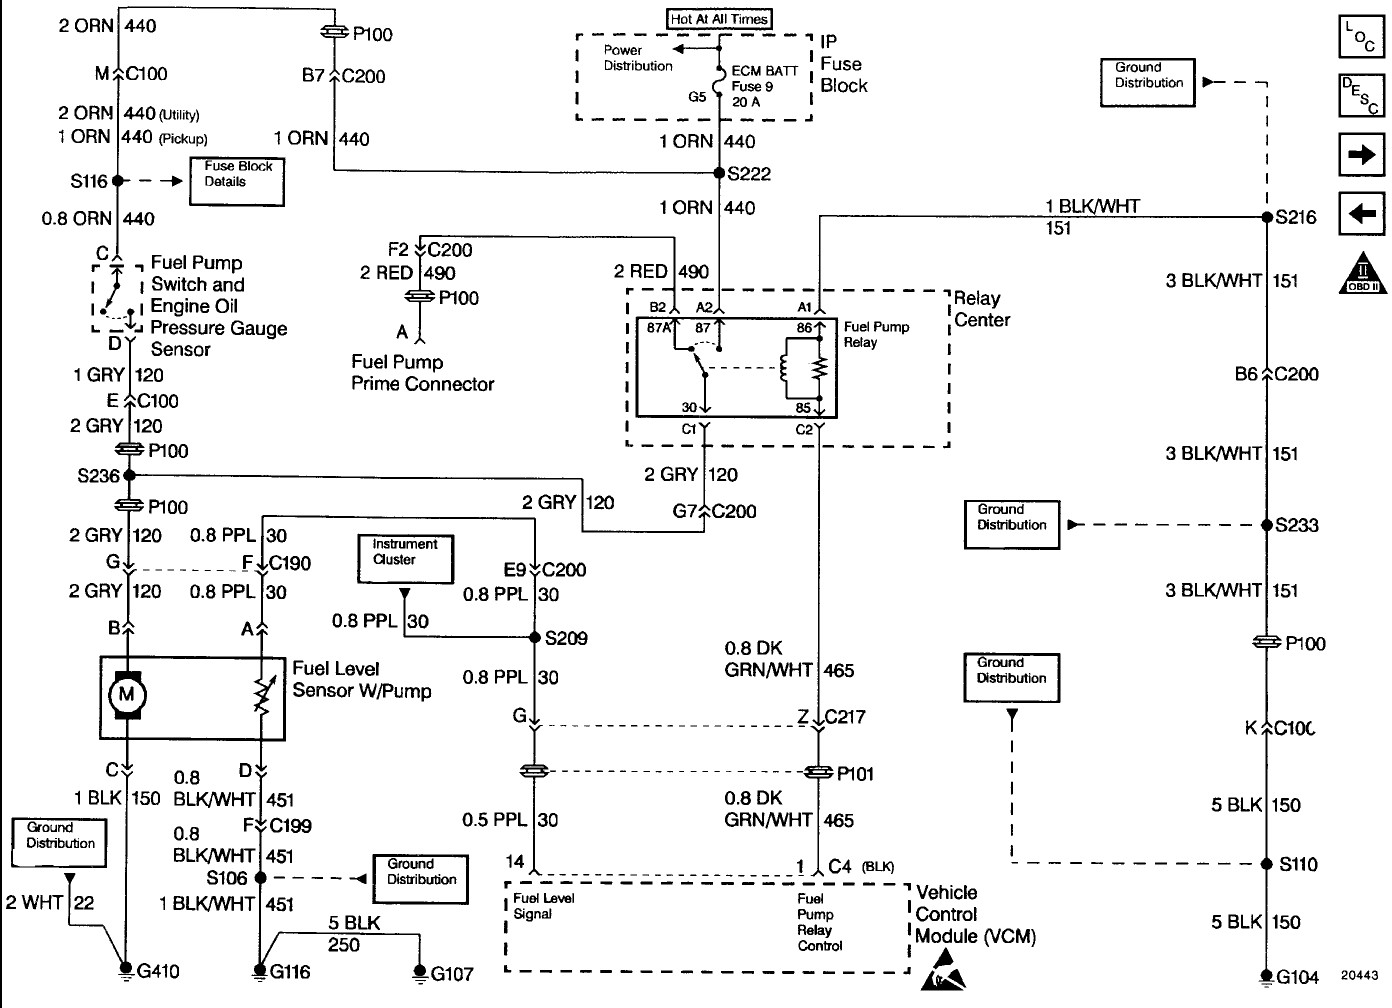 Wiring Diagram For A 1996 Chevy S10 Wiring Diagram 1996 Chevy Blazer Alternator Wiring Diagram 1996 Chevy Blazer Wiring Diagram